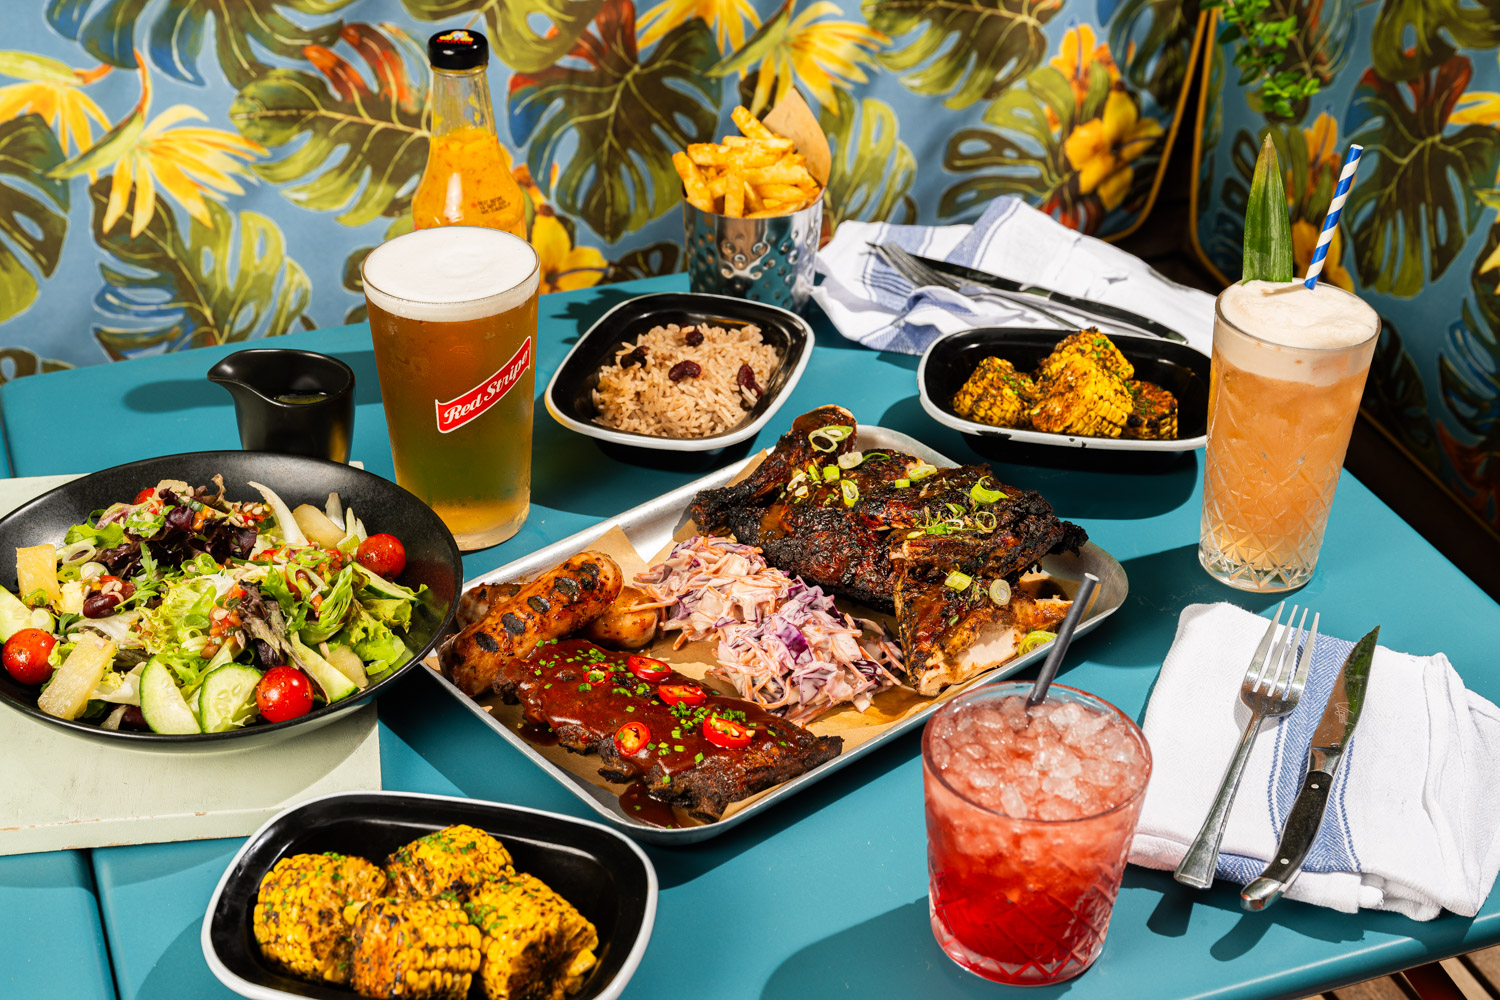 Brand new Summer flavours at Turtle Bay